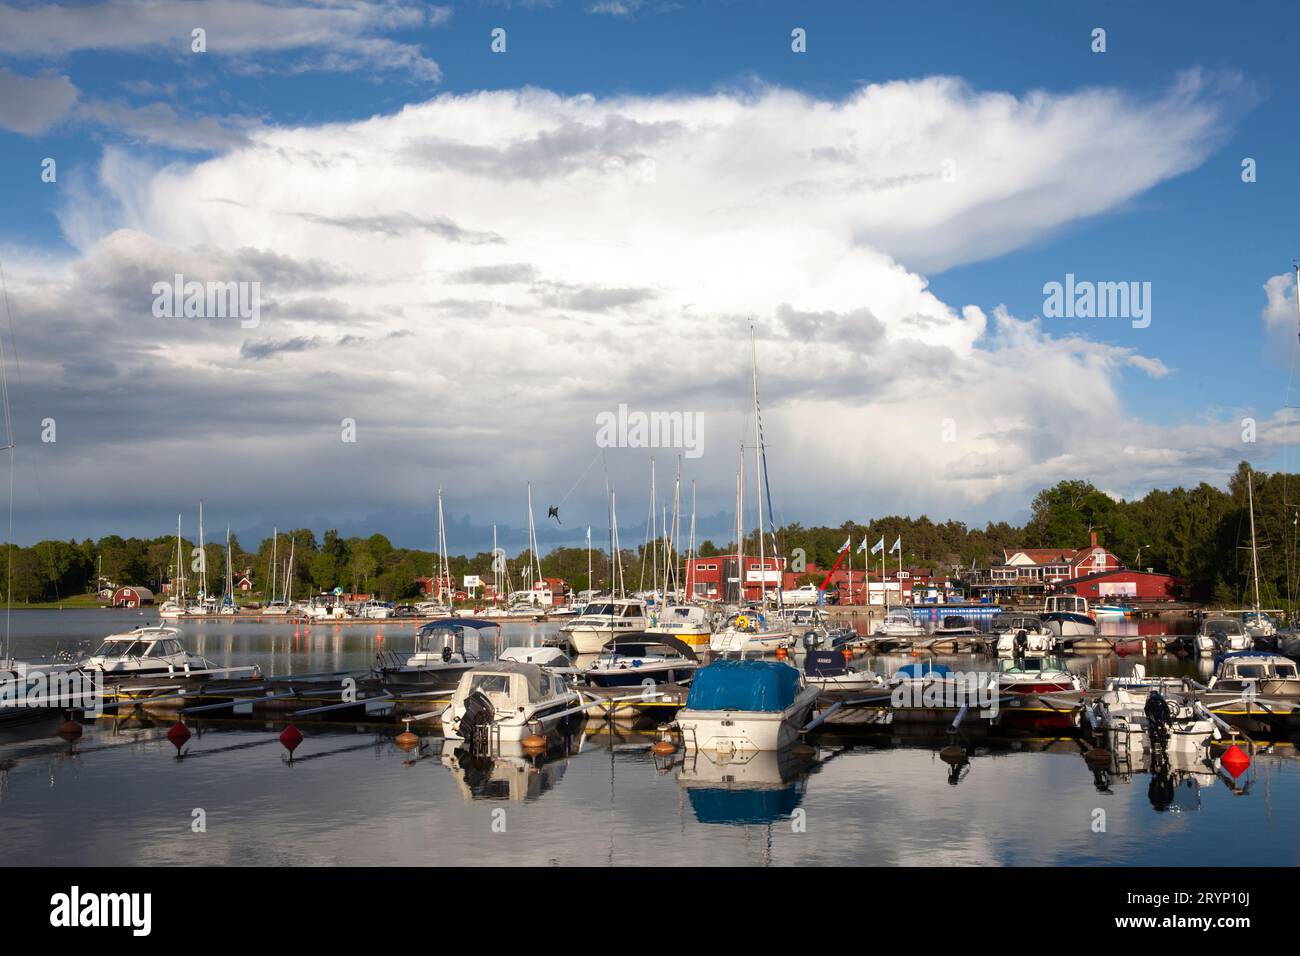 GRISSLEHAMN, SWEDEN ON 25, 2017. The marina on this side is the village by the sea. Evening, sunshine, and showers. Editorial use. Stock Photo